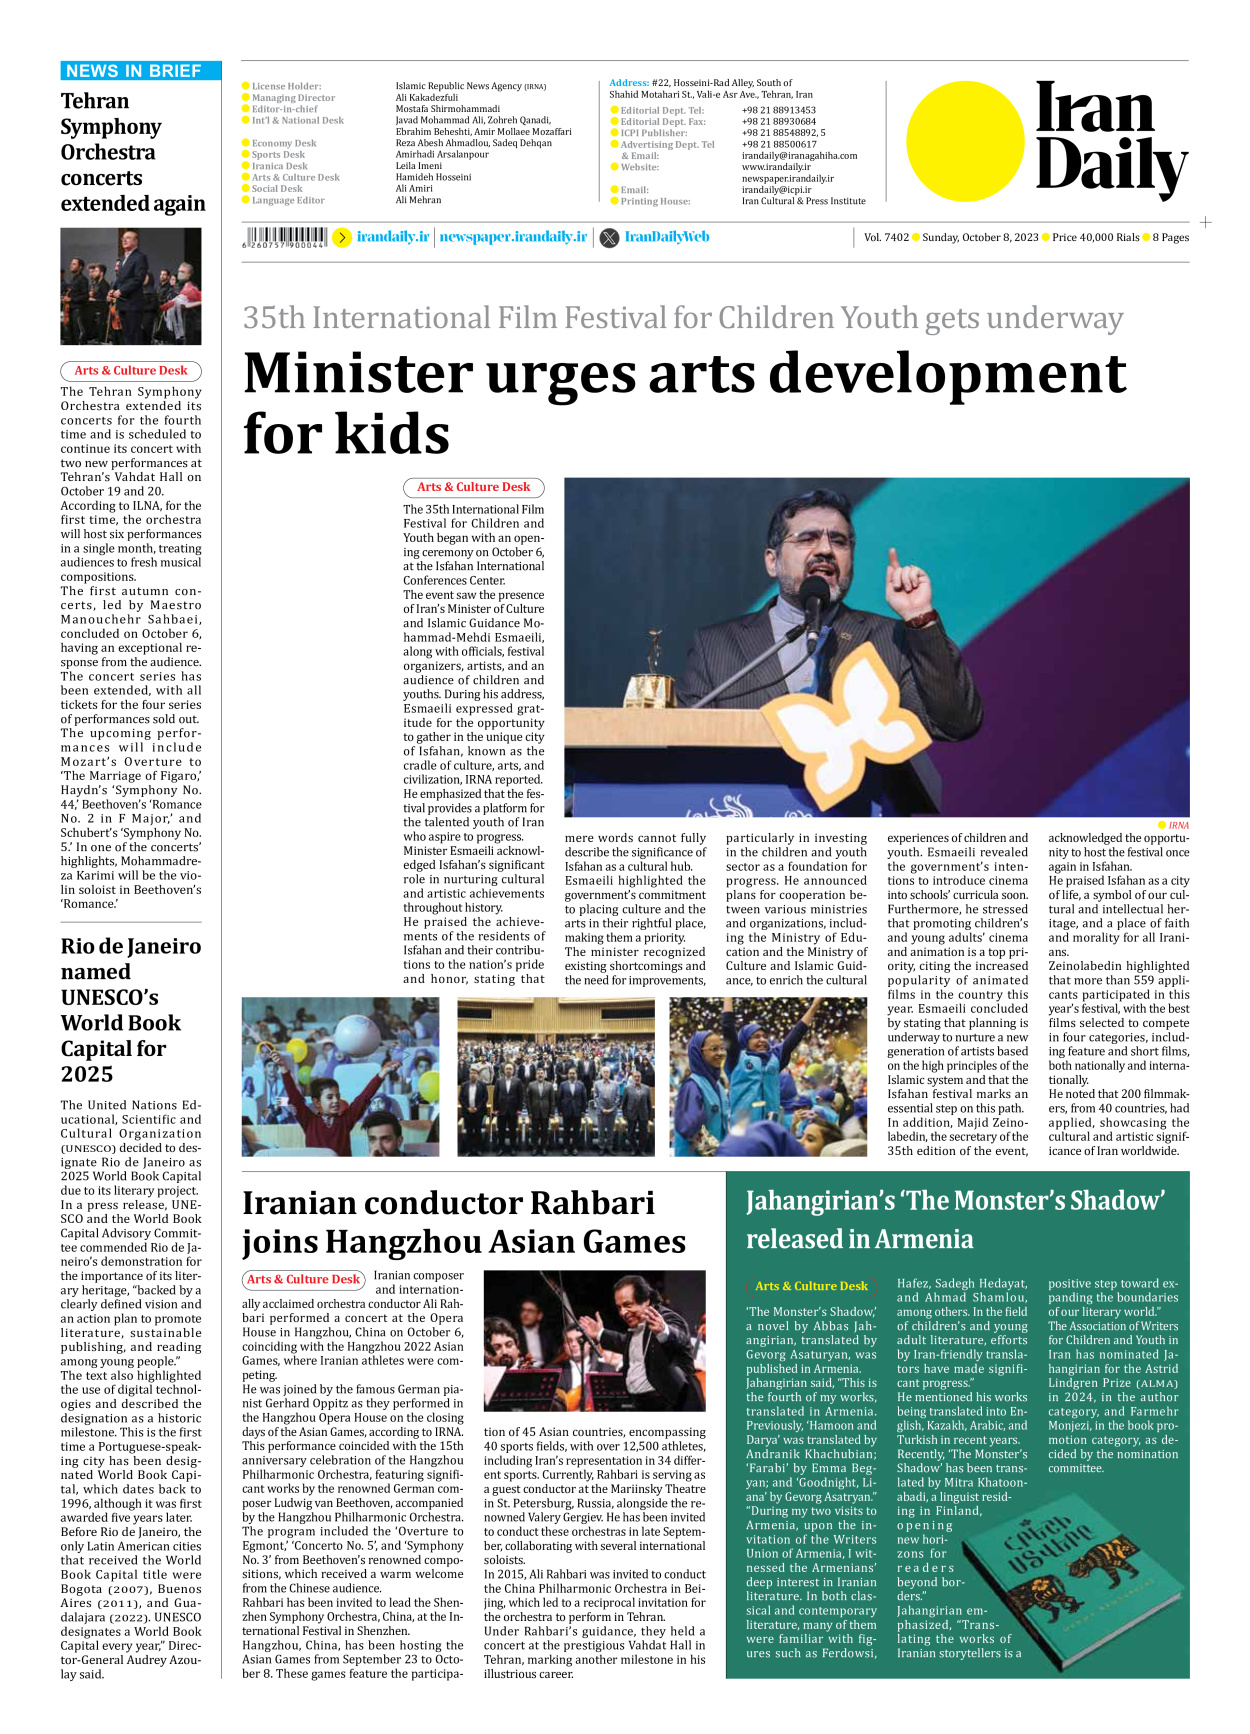 Iran Daily - Number Seven Thousand Four Hundred and Two - 08 October 2023 - Page 8